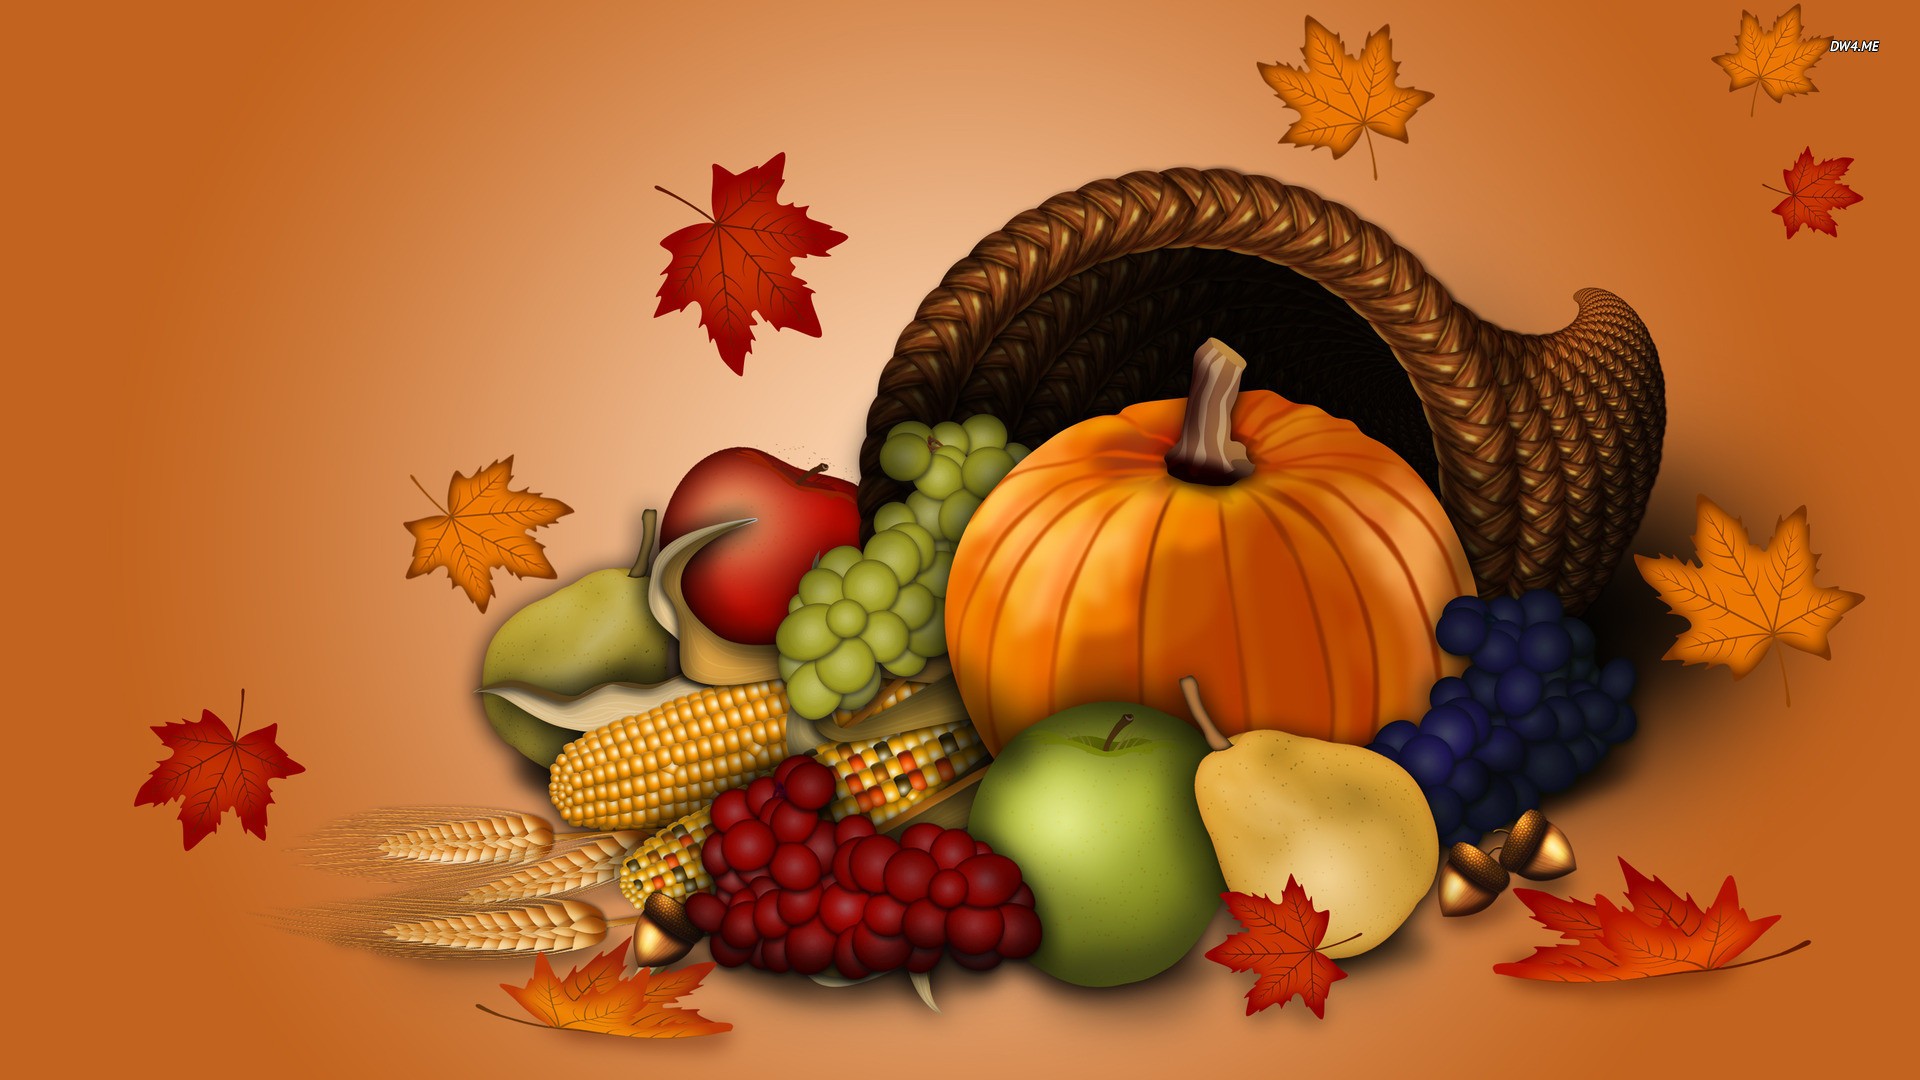 Happy Thanksgiving Background Wallpaper HD For Desktop Cool Image